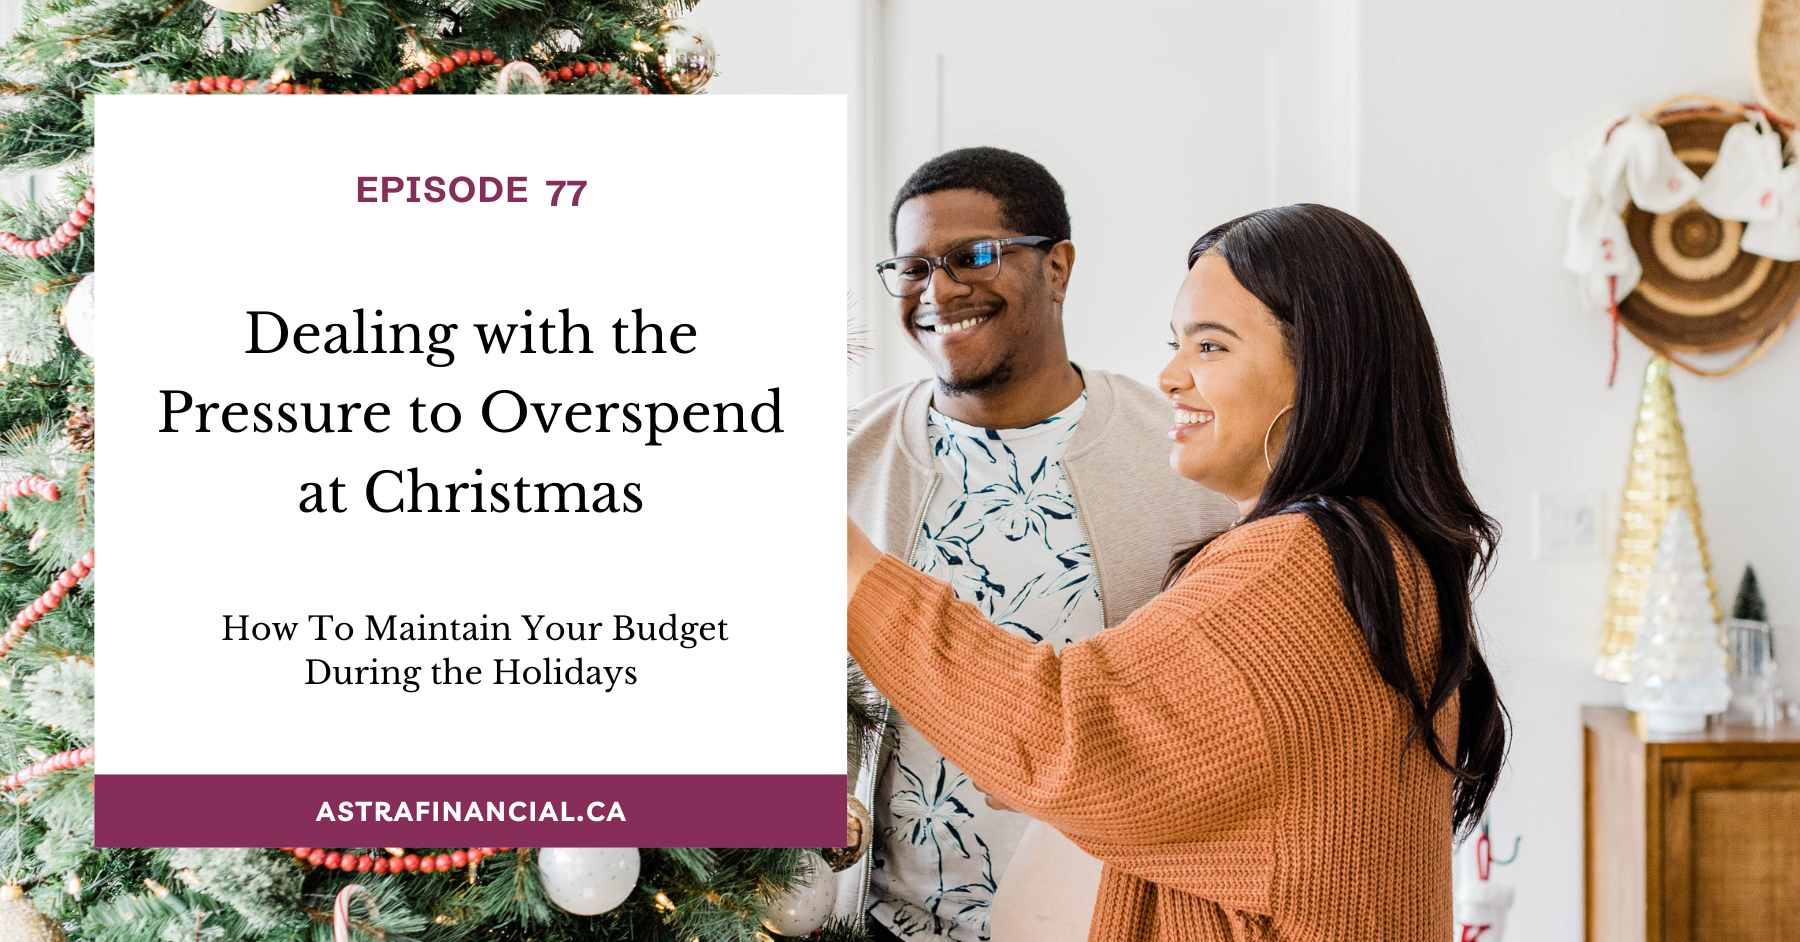 Dealing with the Pressure to Overspend at Christmas by astra financial